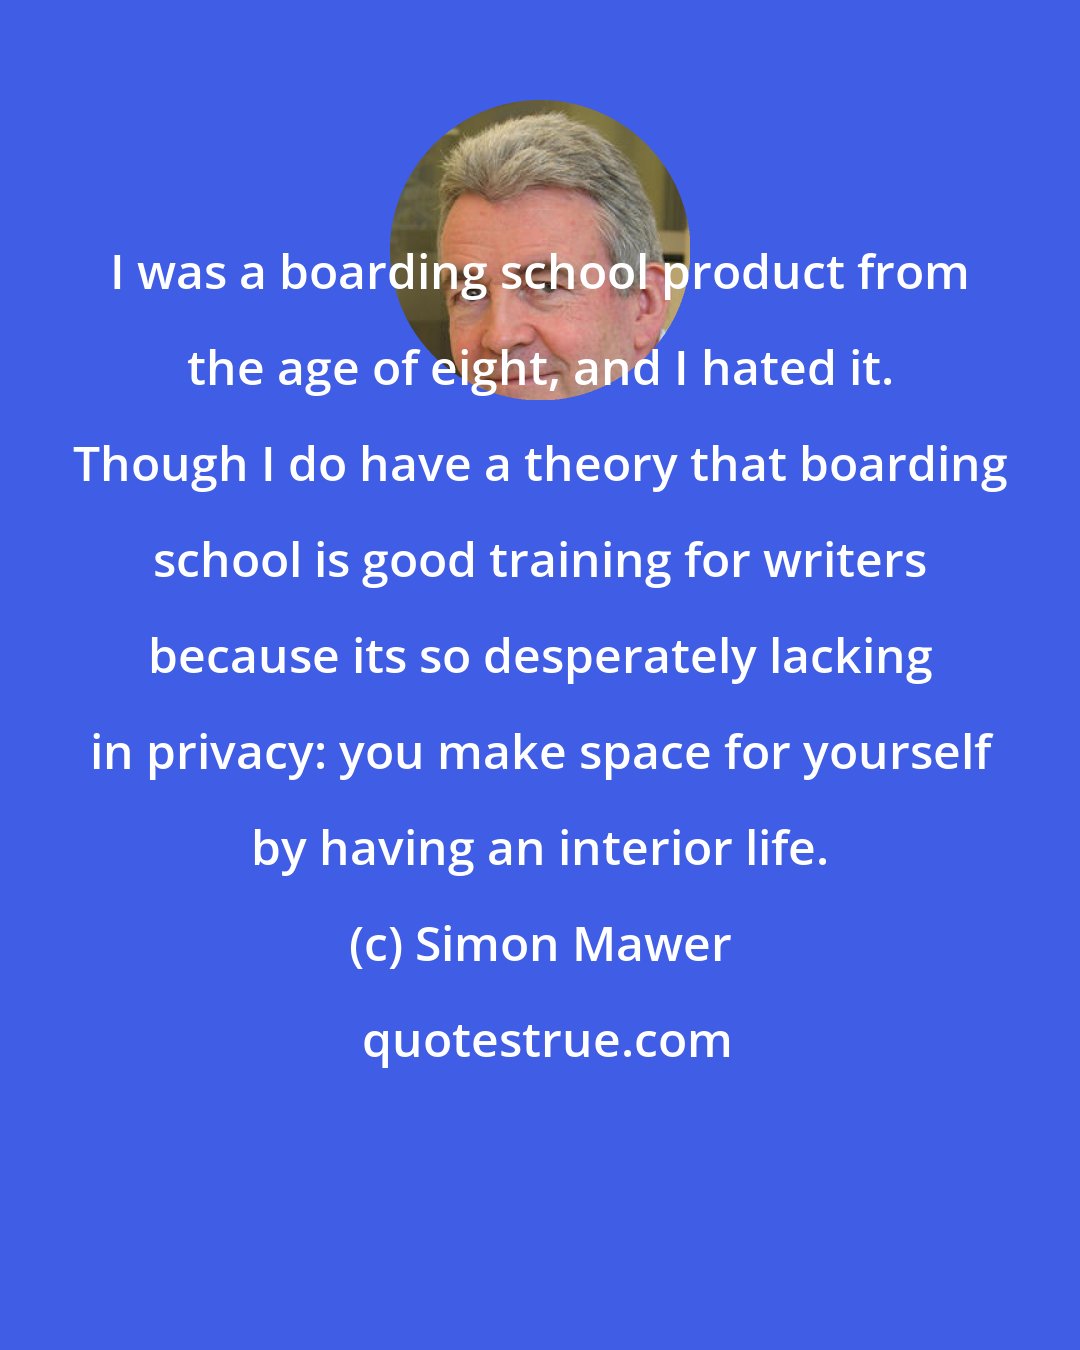 Simon Mawer: I was a boarding school product from the age of eight, and I hated it. Though I do have a theory that boarding school is good training for writers because its so desperately lacking in privacy: you make space for yourself by having an interior life.